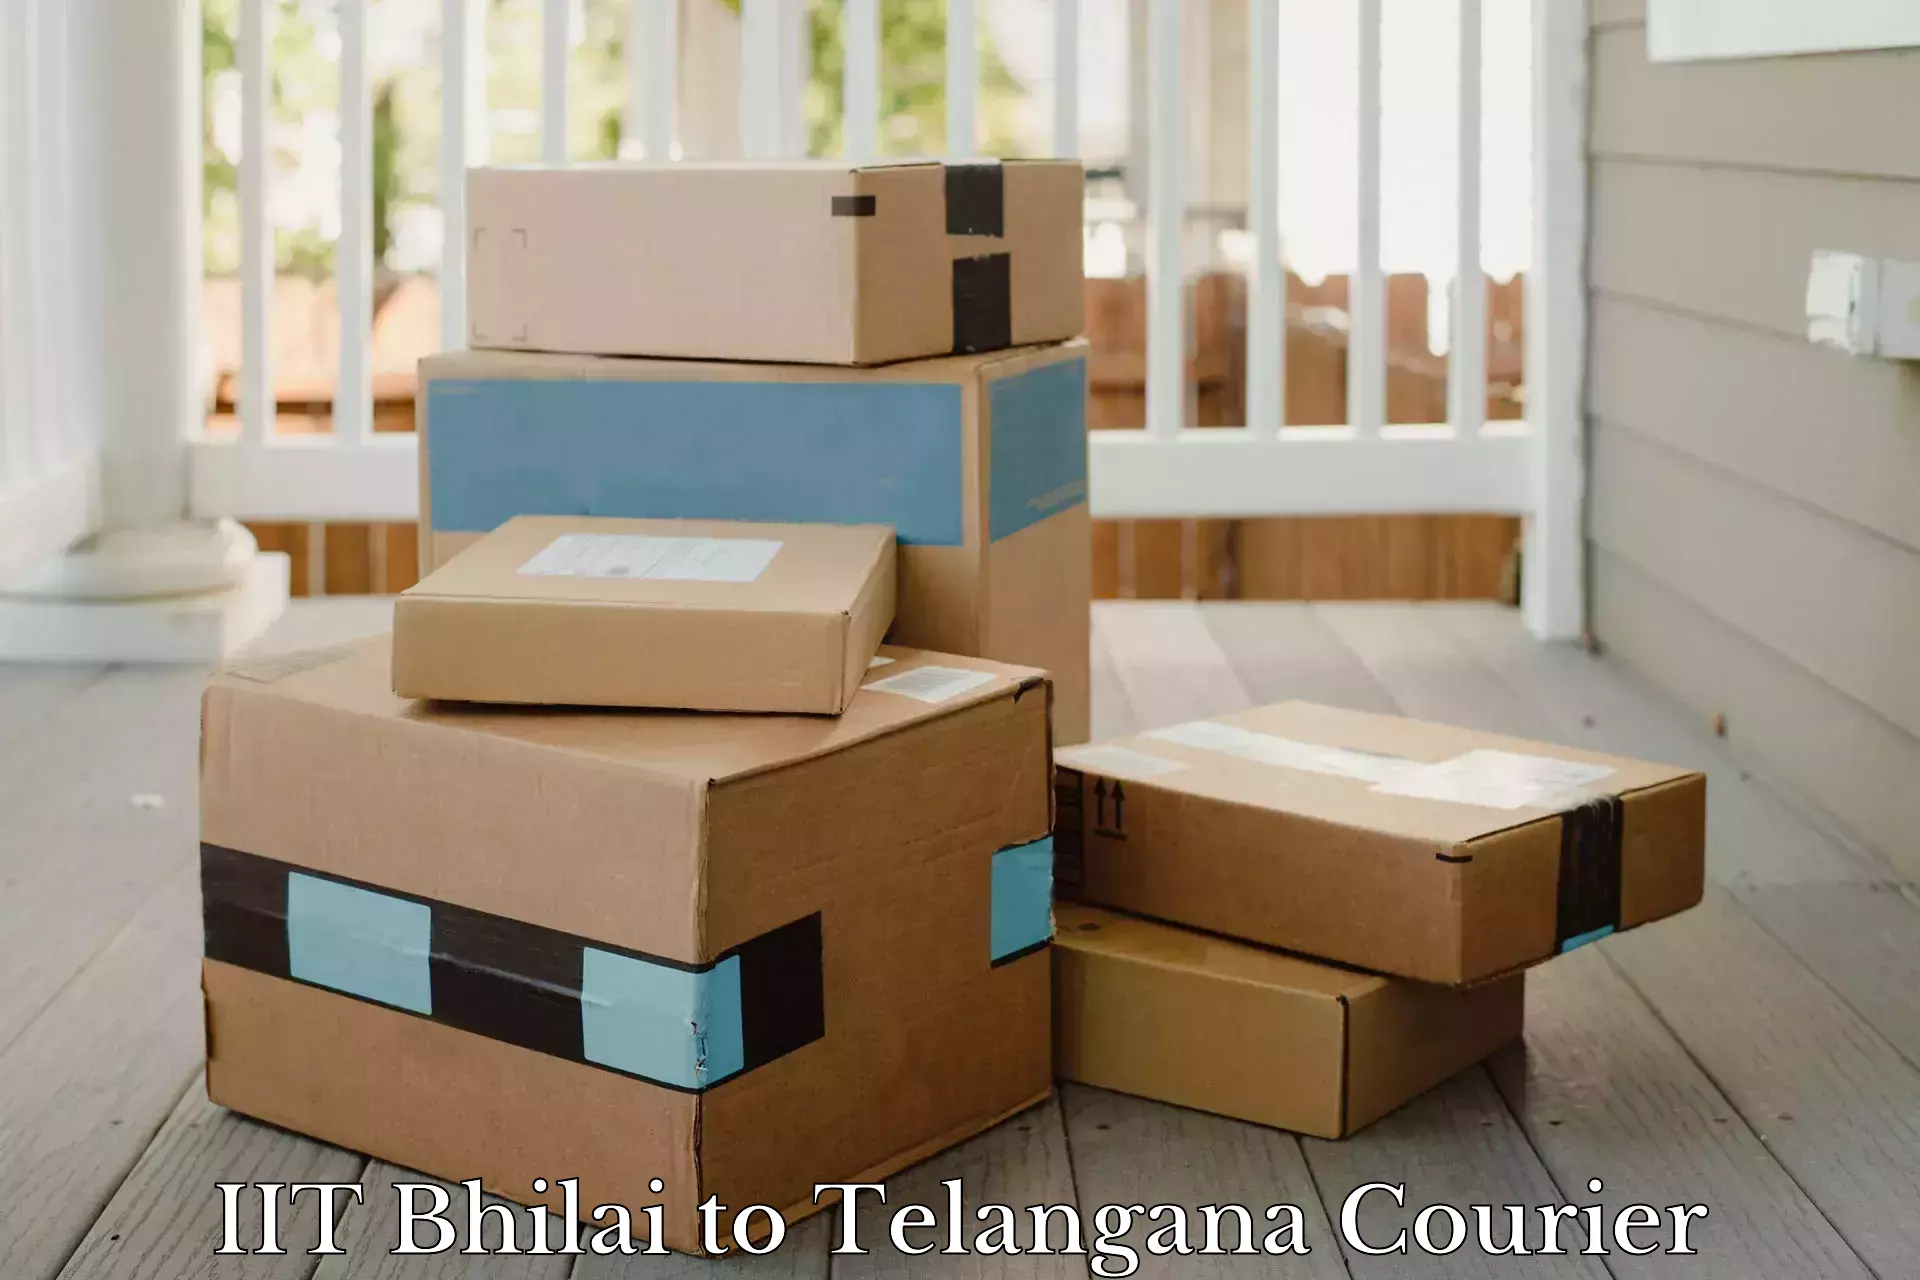 International courier networks in IIT Bhilai to Sultanabad